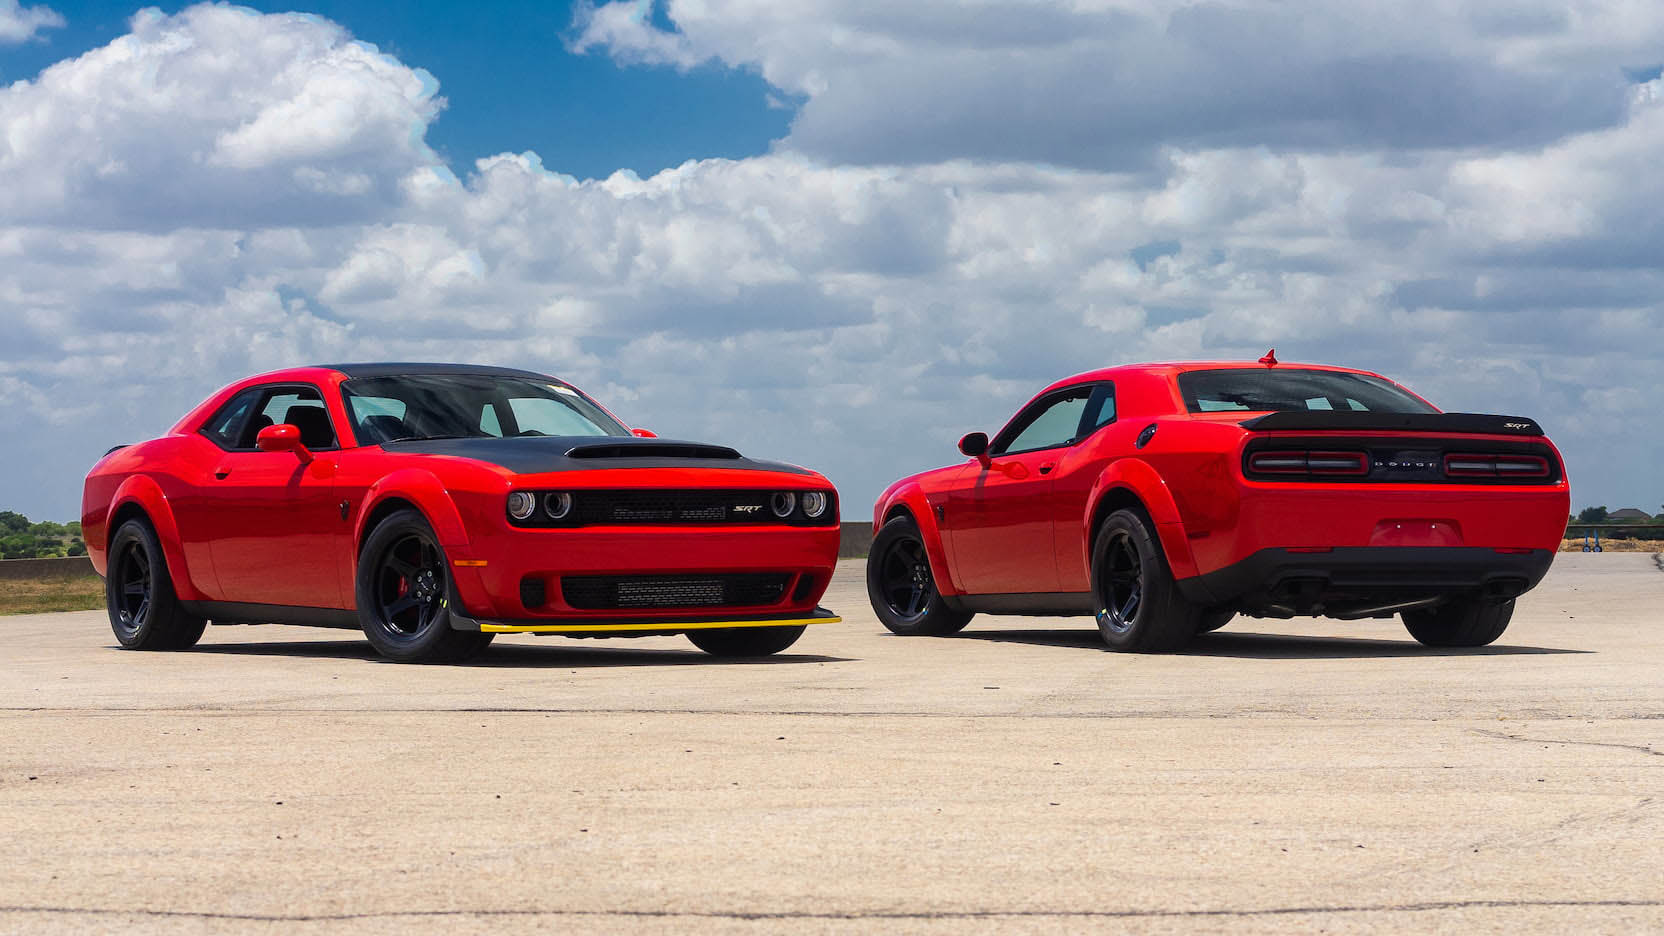 Two Dodge Challenger Demon in auction (4)